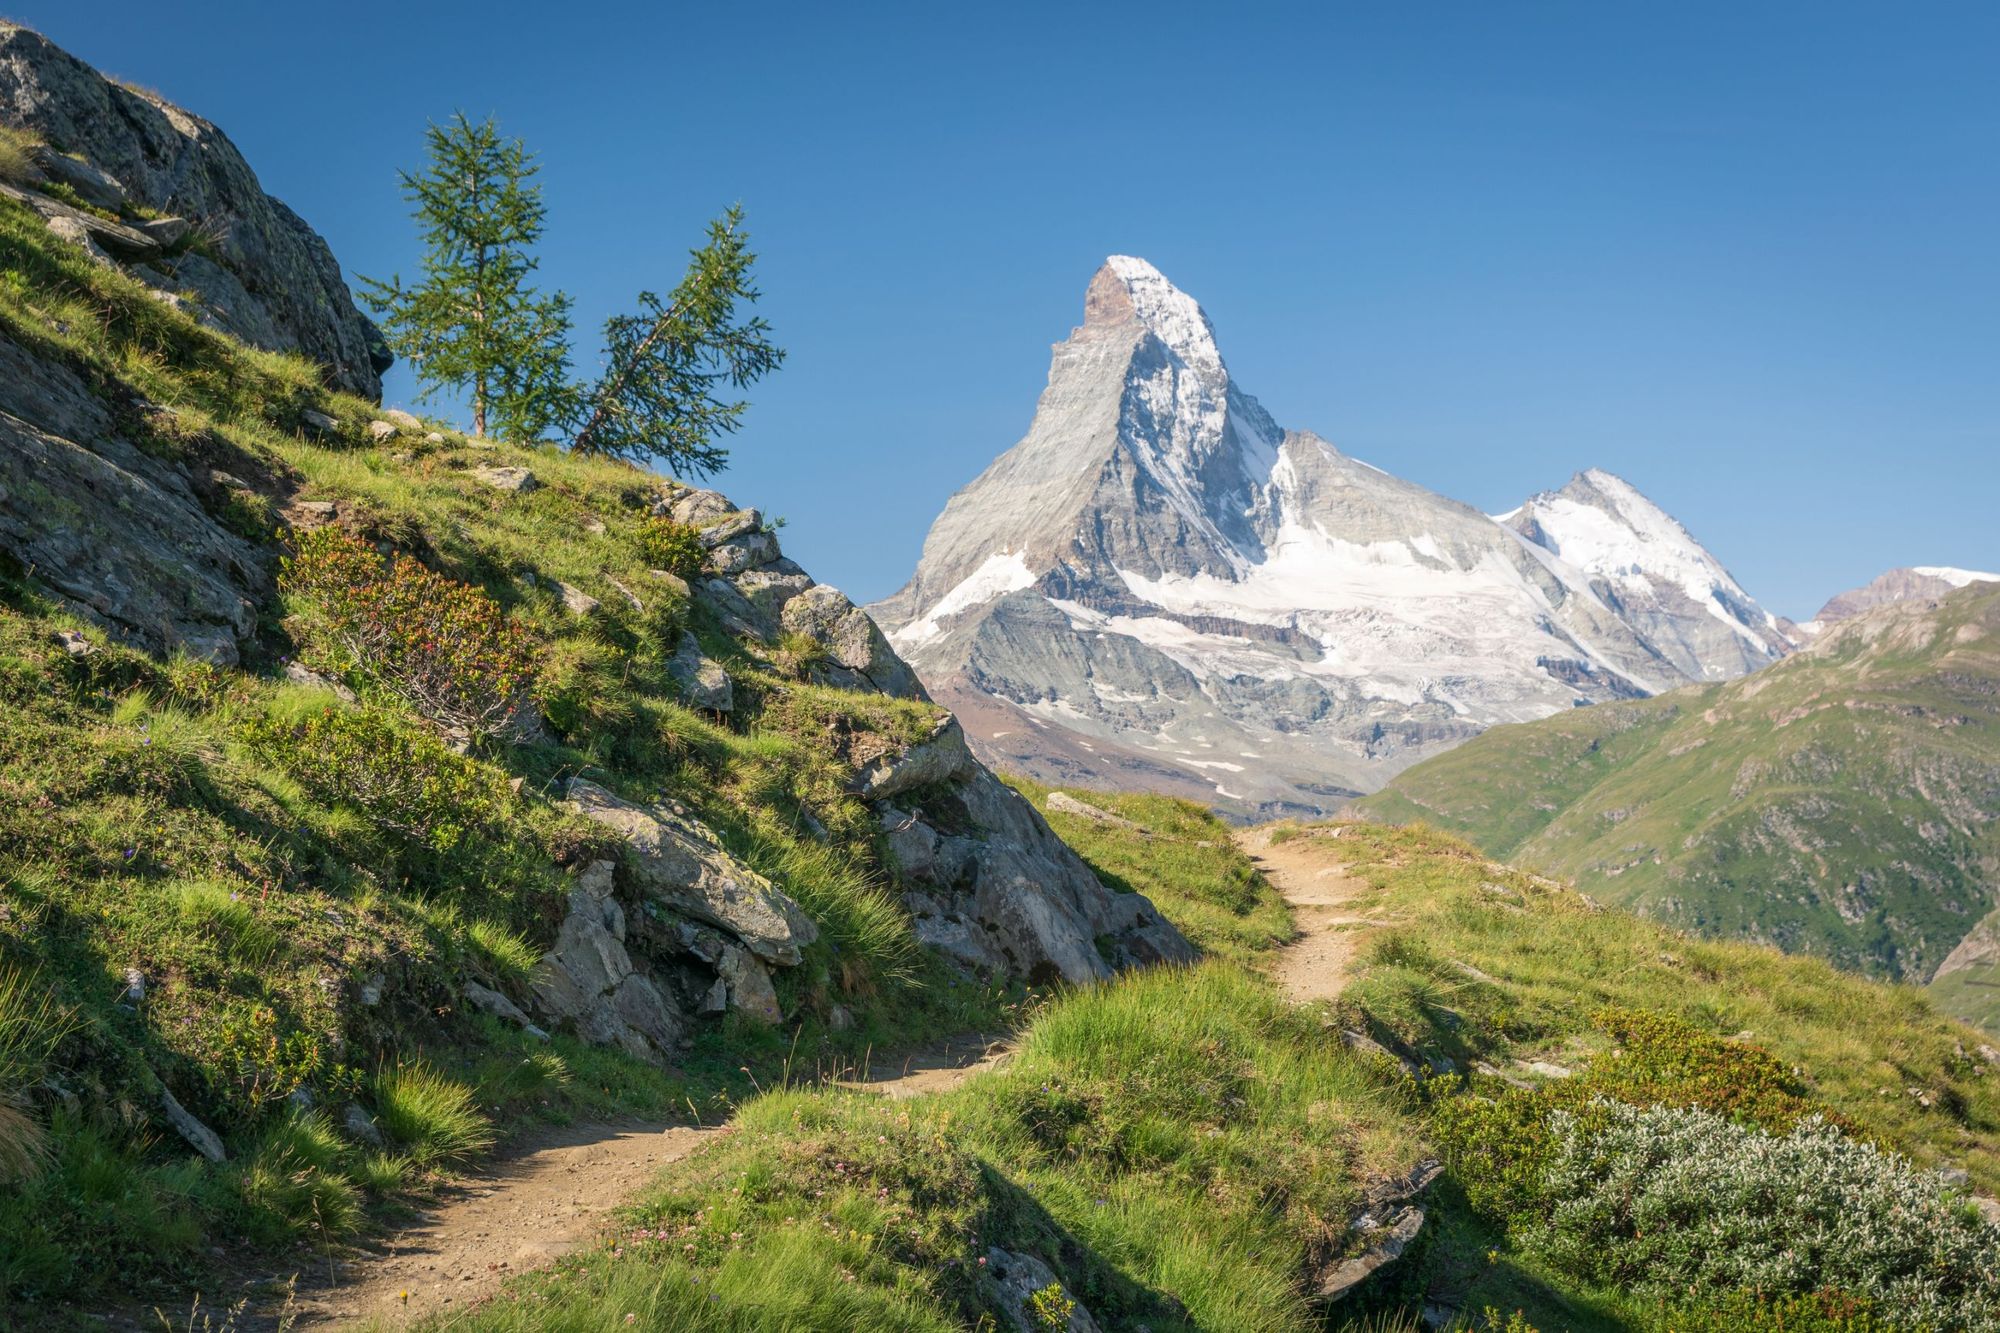 A view of the Matterhorn from the Europa Trail, or Europaweg, which forms part of the Tour of the Matterhorn, or as some call it, the Matterhorn Circuit. Photo: Getty